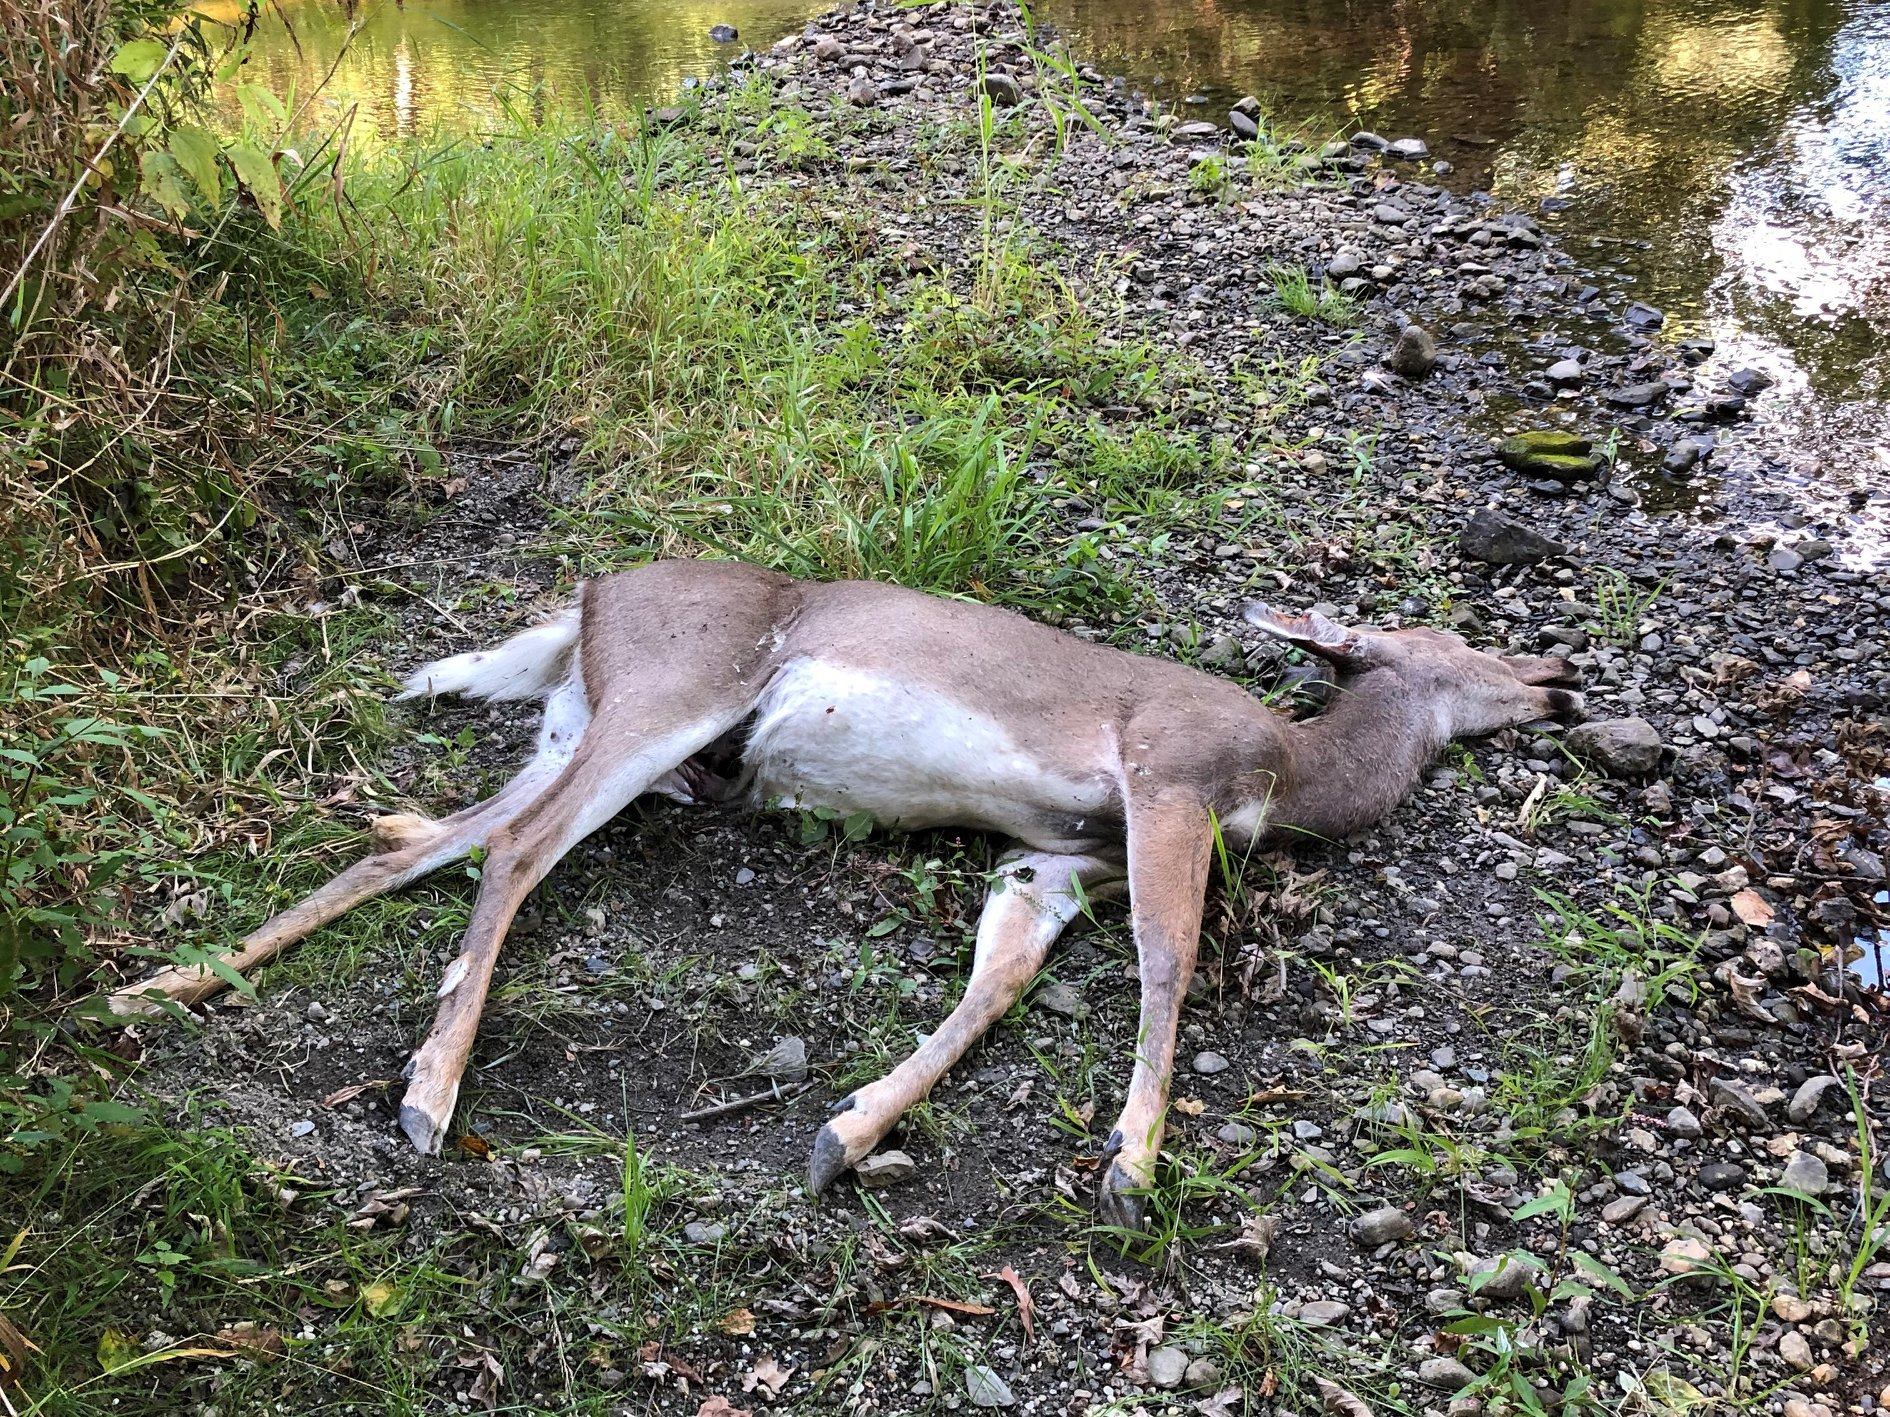 A whitetail that died near water due to an EHD outbreak.